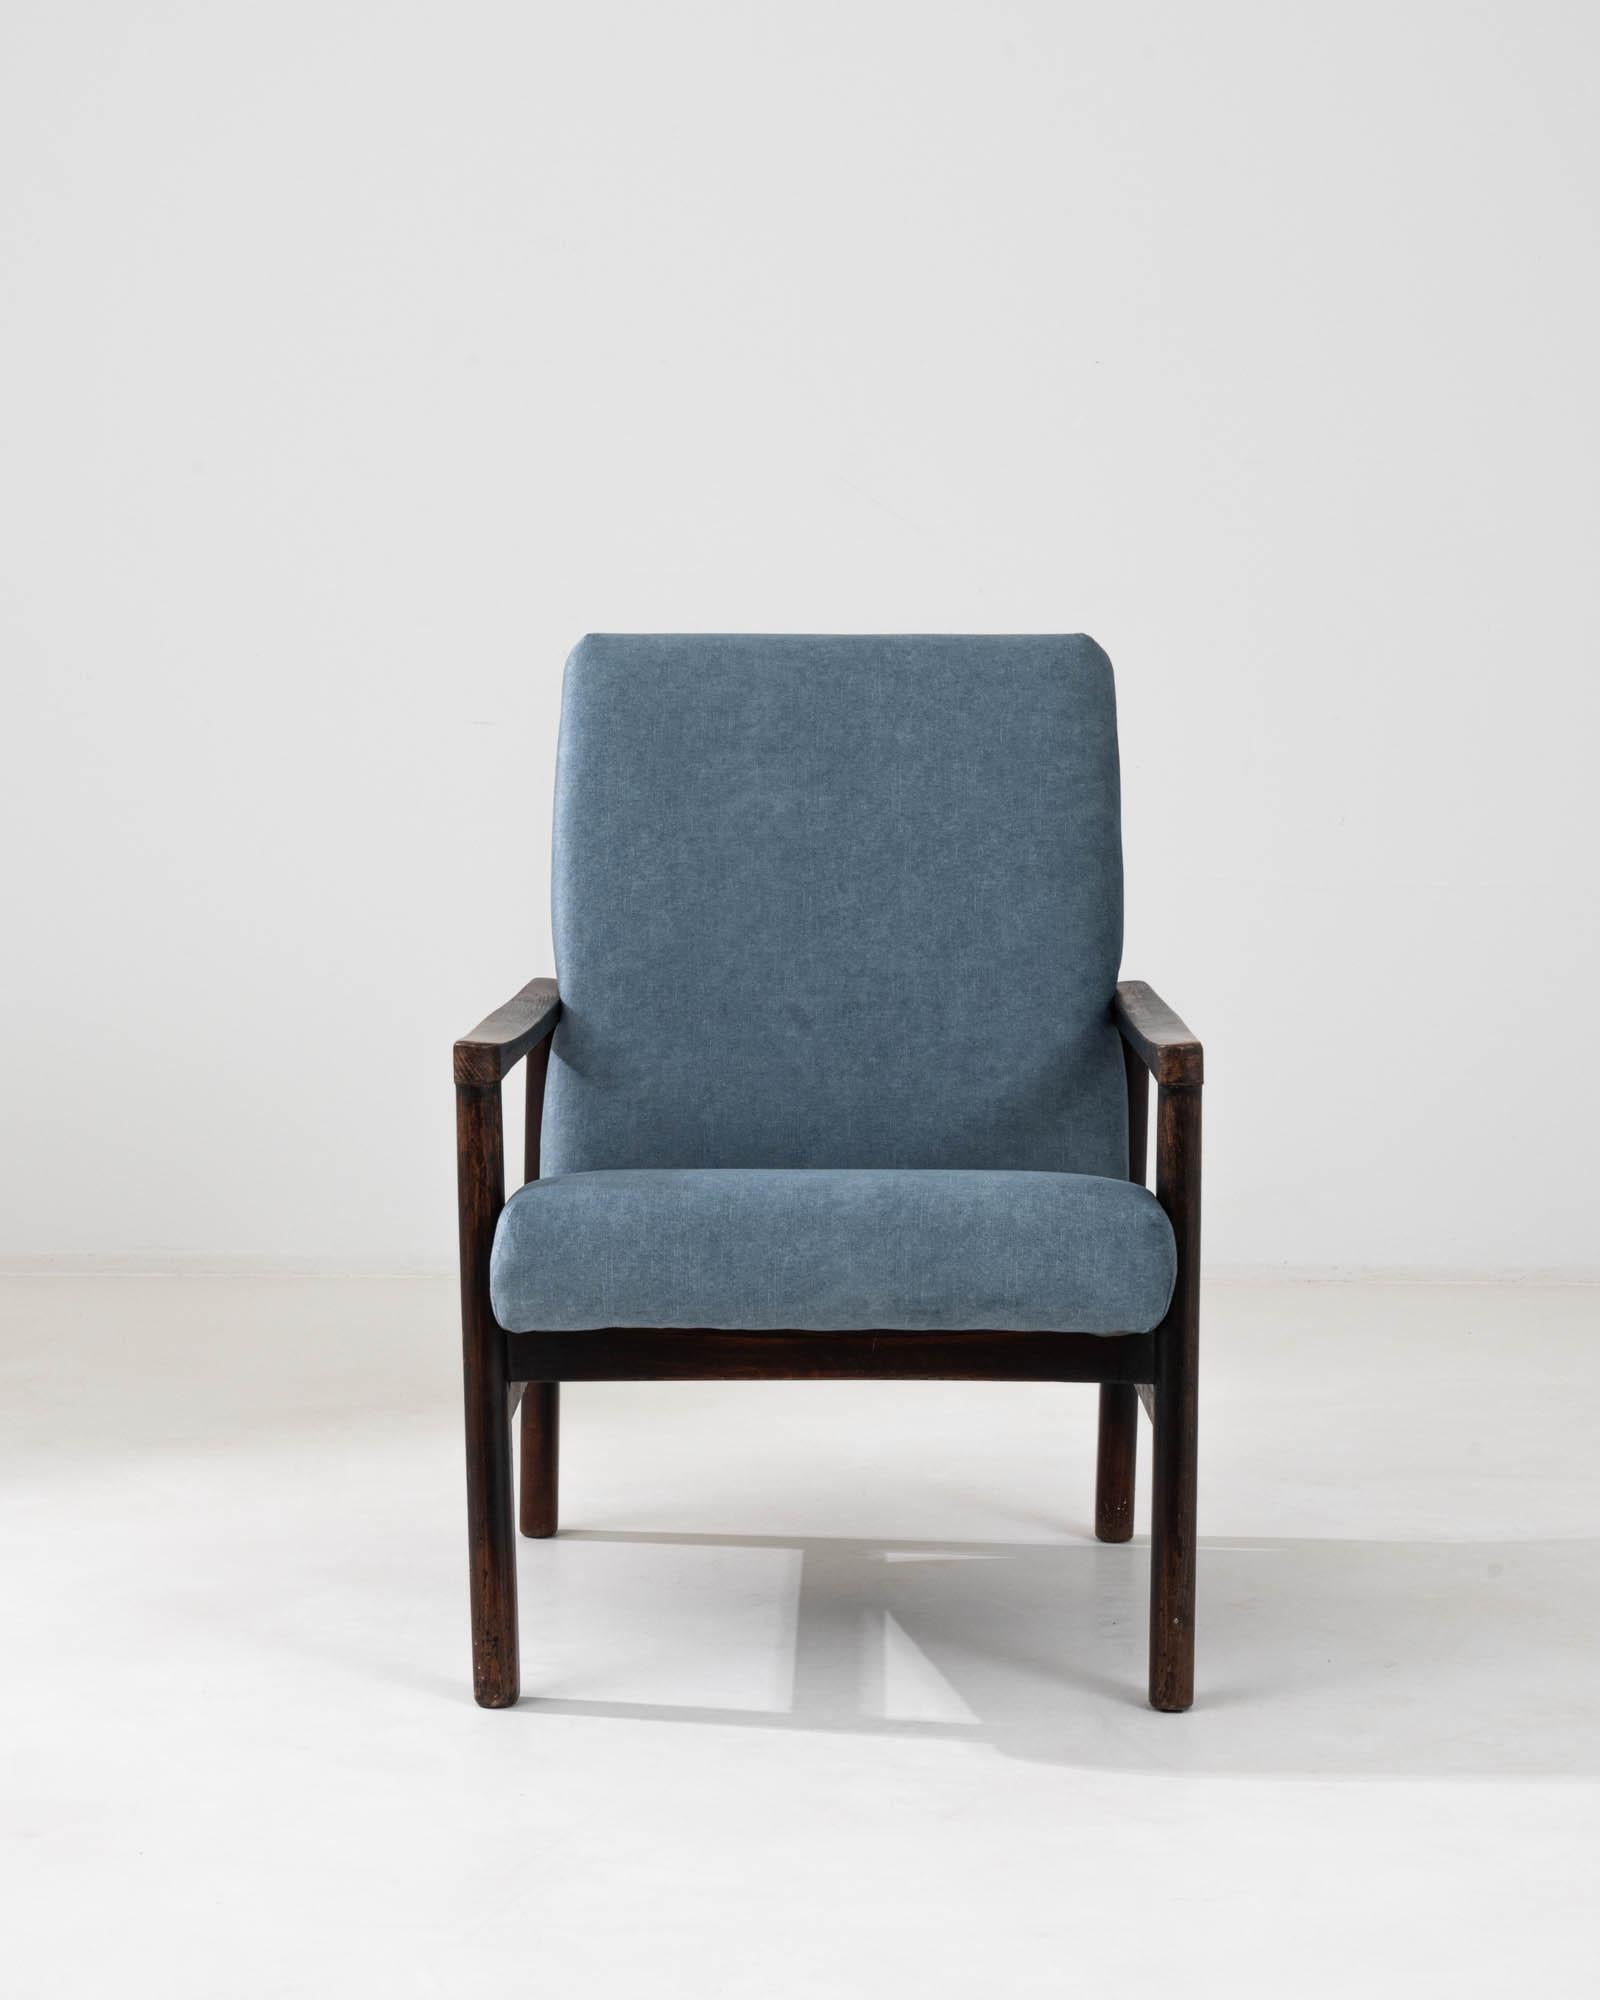 This 1960s Czech upholstered armchair is a testament to the art of timeless design, combining comfort and elegance. The chair features a solid wooden frame with a deep, rich patina that exudes the perfect balance of strength and style. Its sweeping